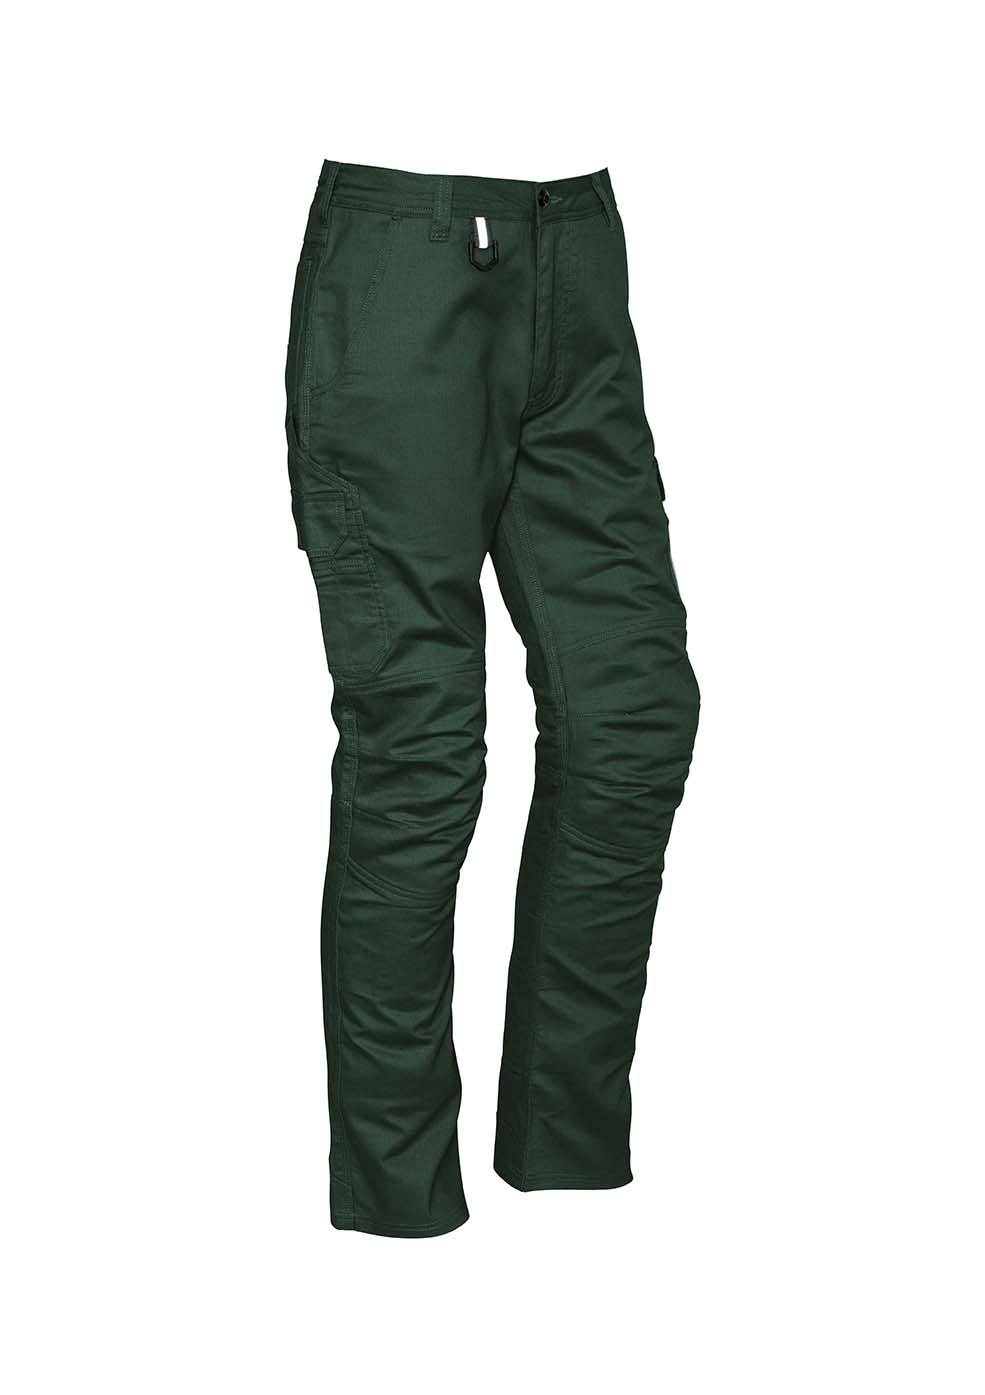 Mens Rugged Cooling Cargo Pant - Uniforms and Workwear NZ - Ticketwearconz